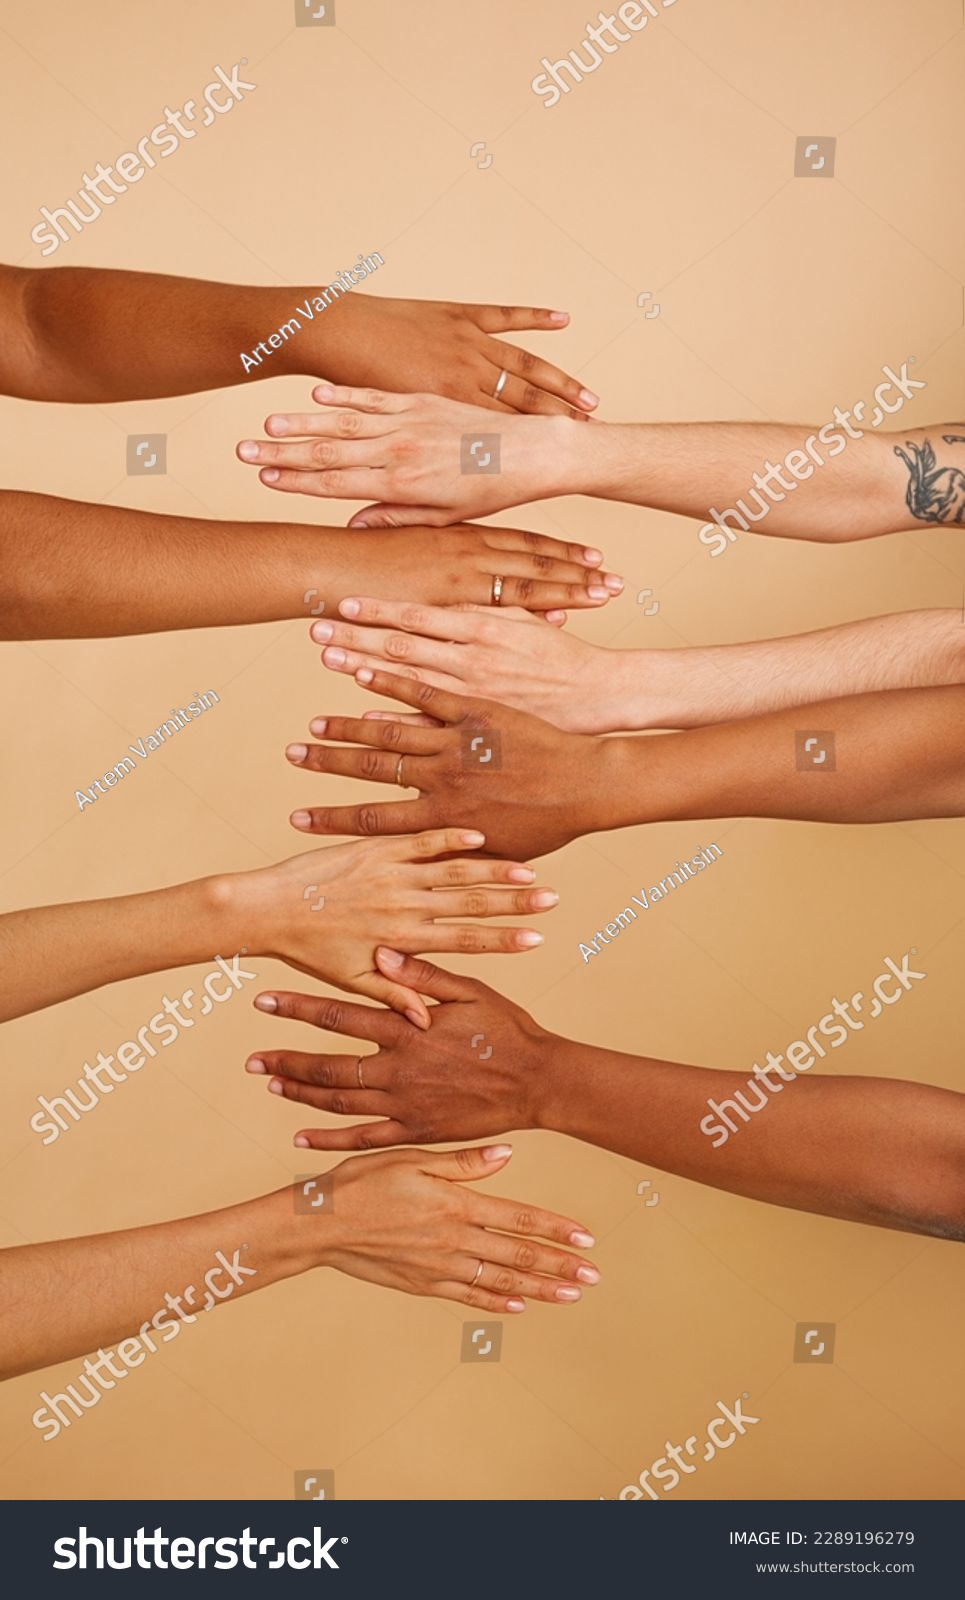 Hands of unrecognizable women with different skin colors #2289196279